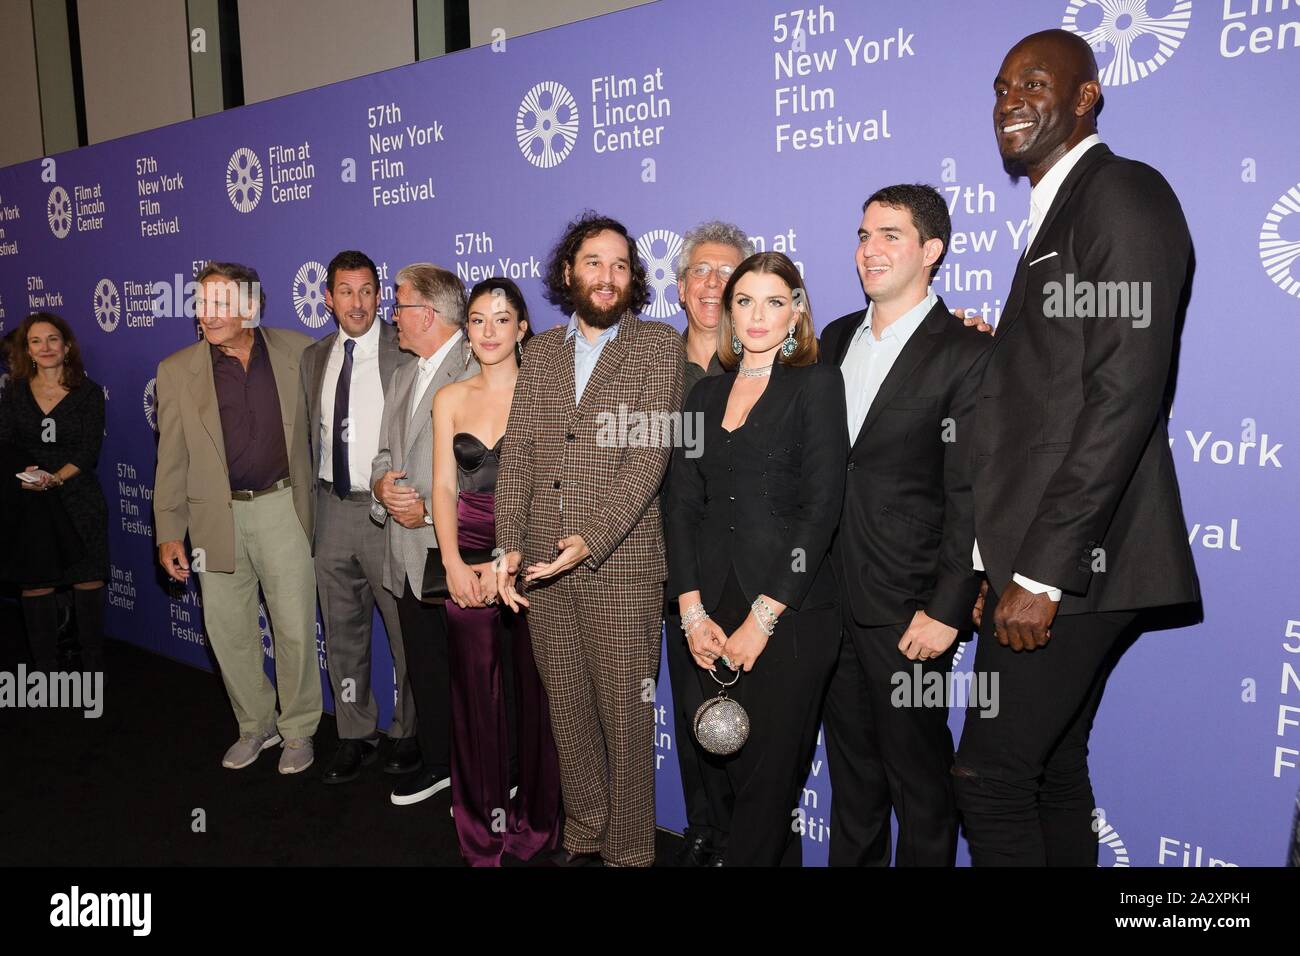 New York, NY, USA. 3rd Oct, 2019. Judd Hirsch, Adam Sandler, Mike Francesca, guest, Josh Safdie, Eric Bogosian, Julia Fox, Benny Safdie, Kevin Garnett at arrivals for UNCUT GEMS Premiere at 2019 New York Film Festival (NYFF), Alice Tully Hall at Lincoln Center, New York, NY October 3, 2019. Credit: Jason Smith/Everett Collection/Alamy Live News Stock Photo